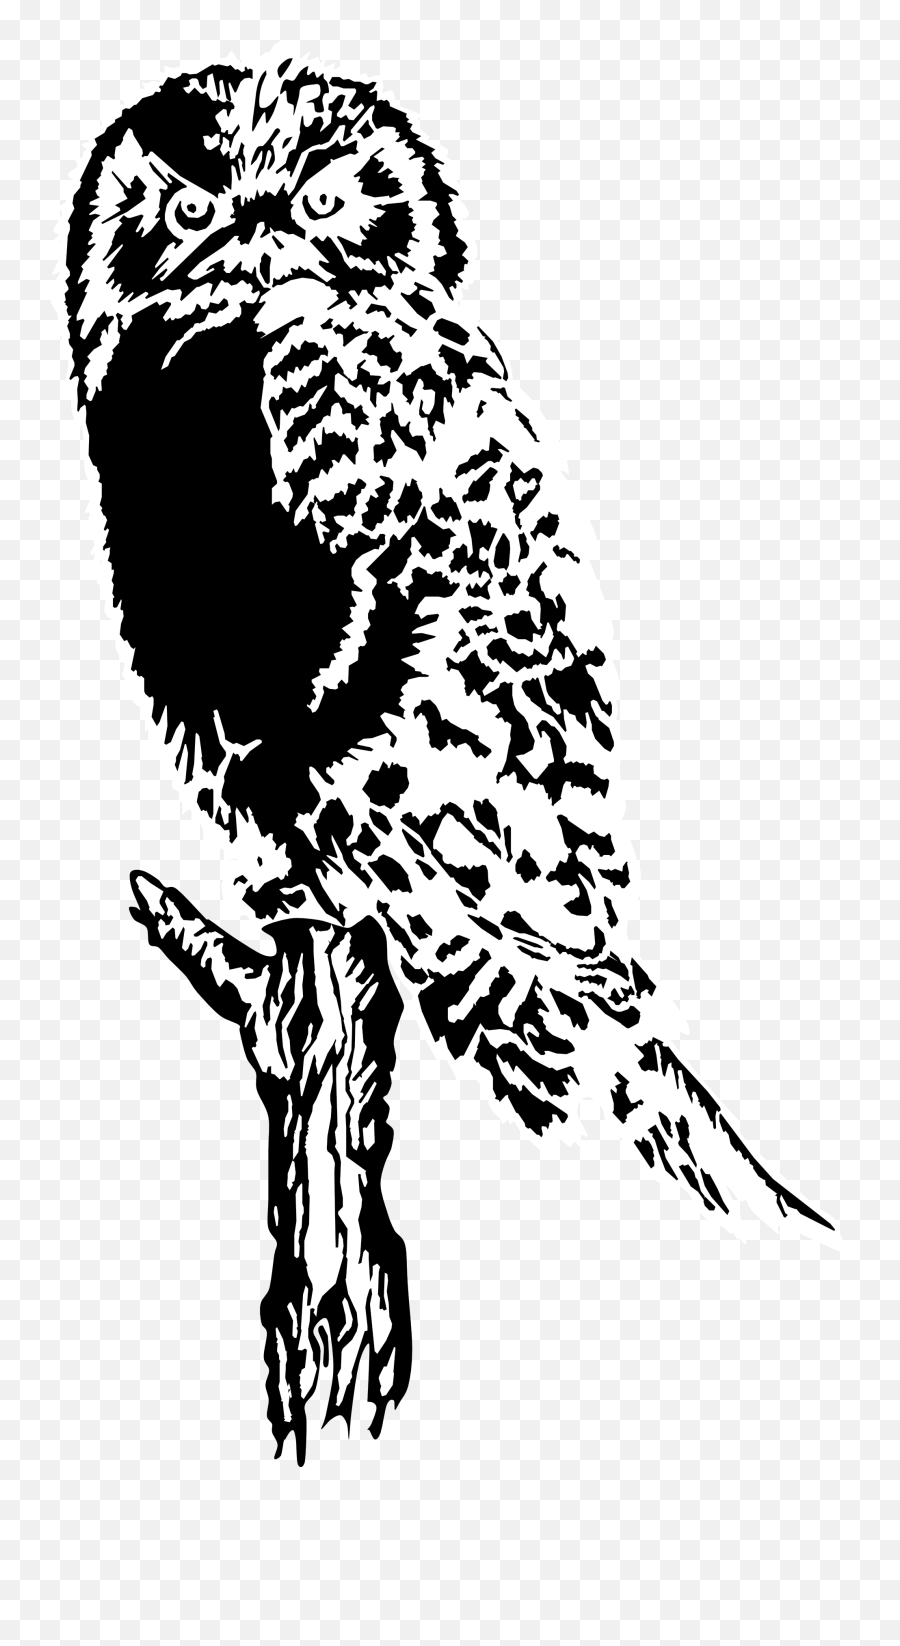 Black And White Clip Art Owls On Books - Owl Silhouette Images On Tree Emoji,Owl Clipart Black And White